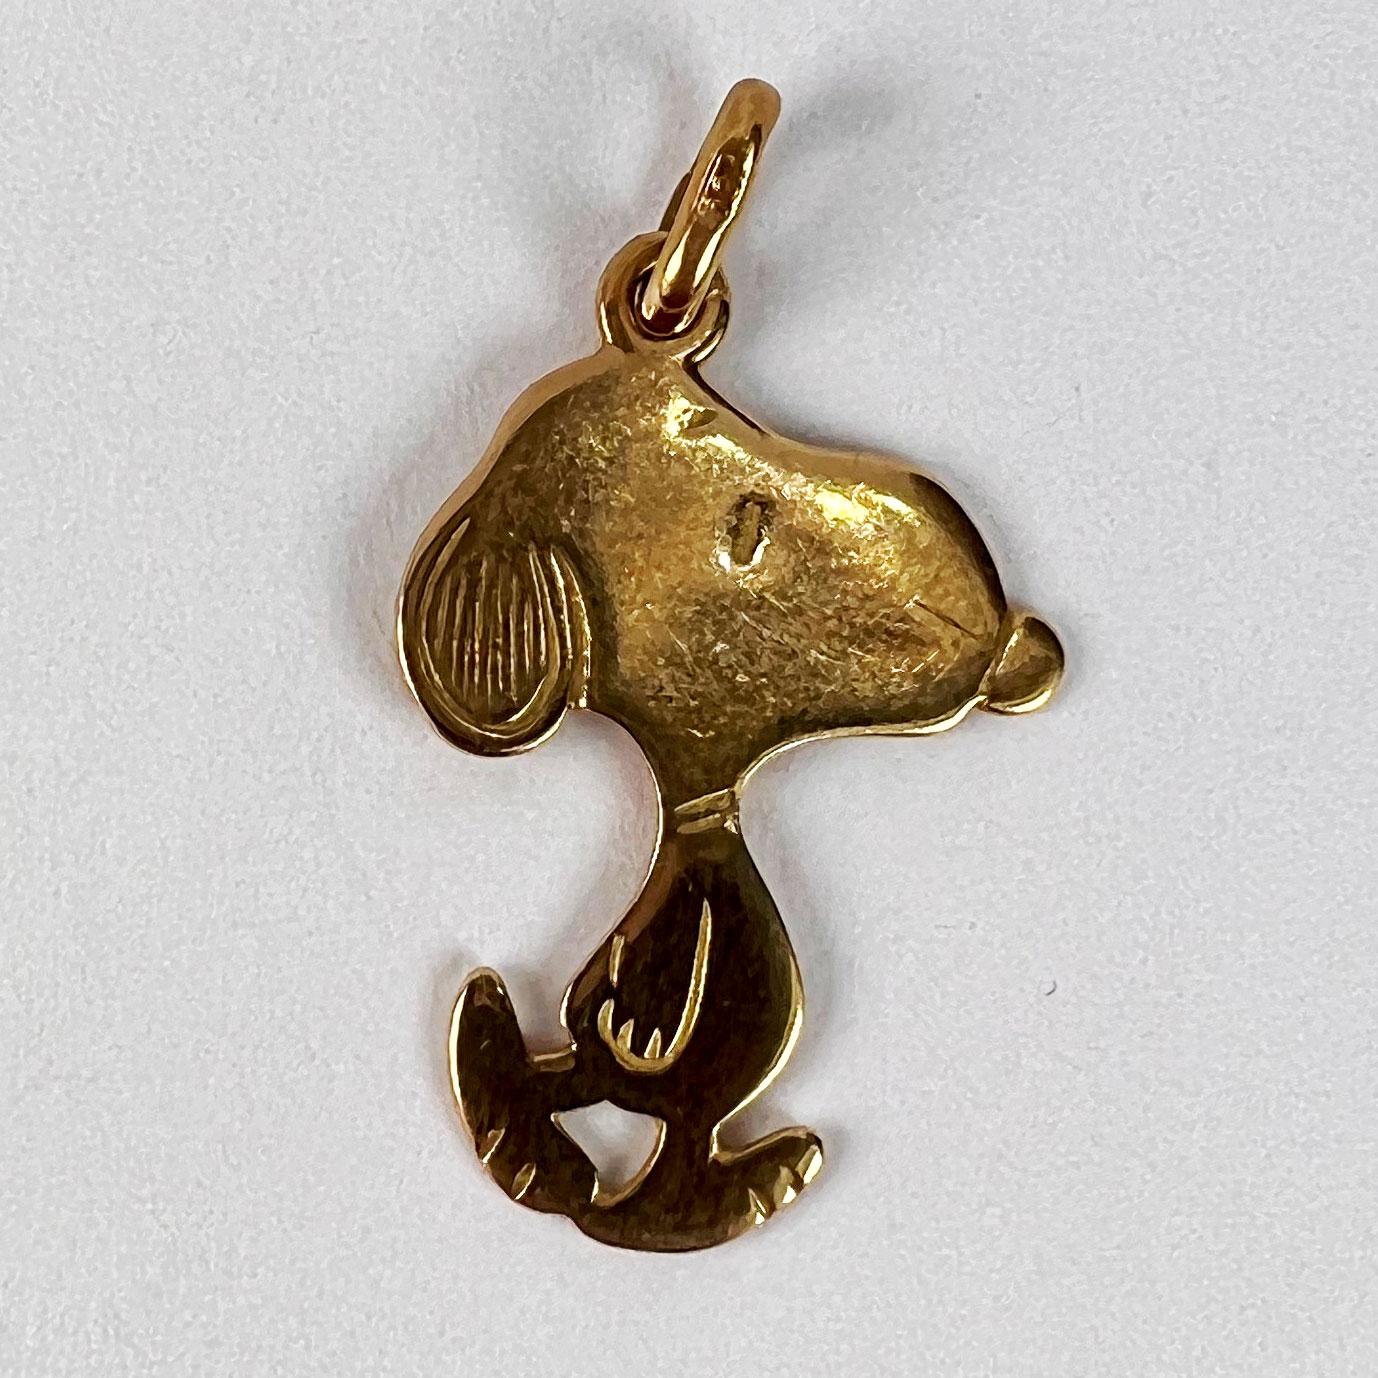 French Snoopy Dog 18K Gold Charm Pendant 3